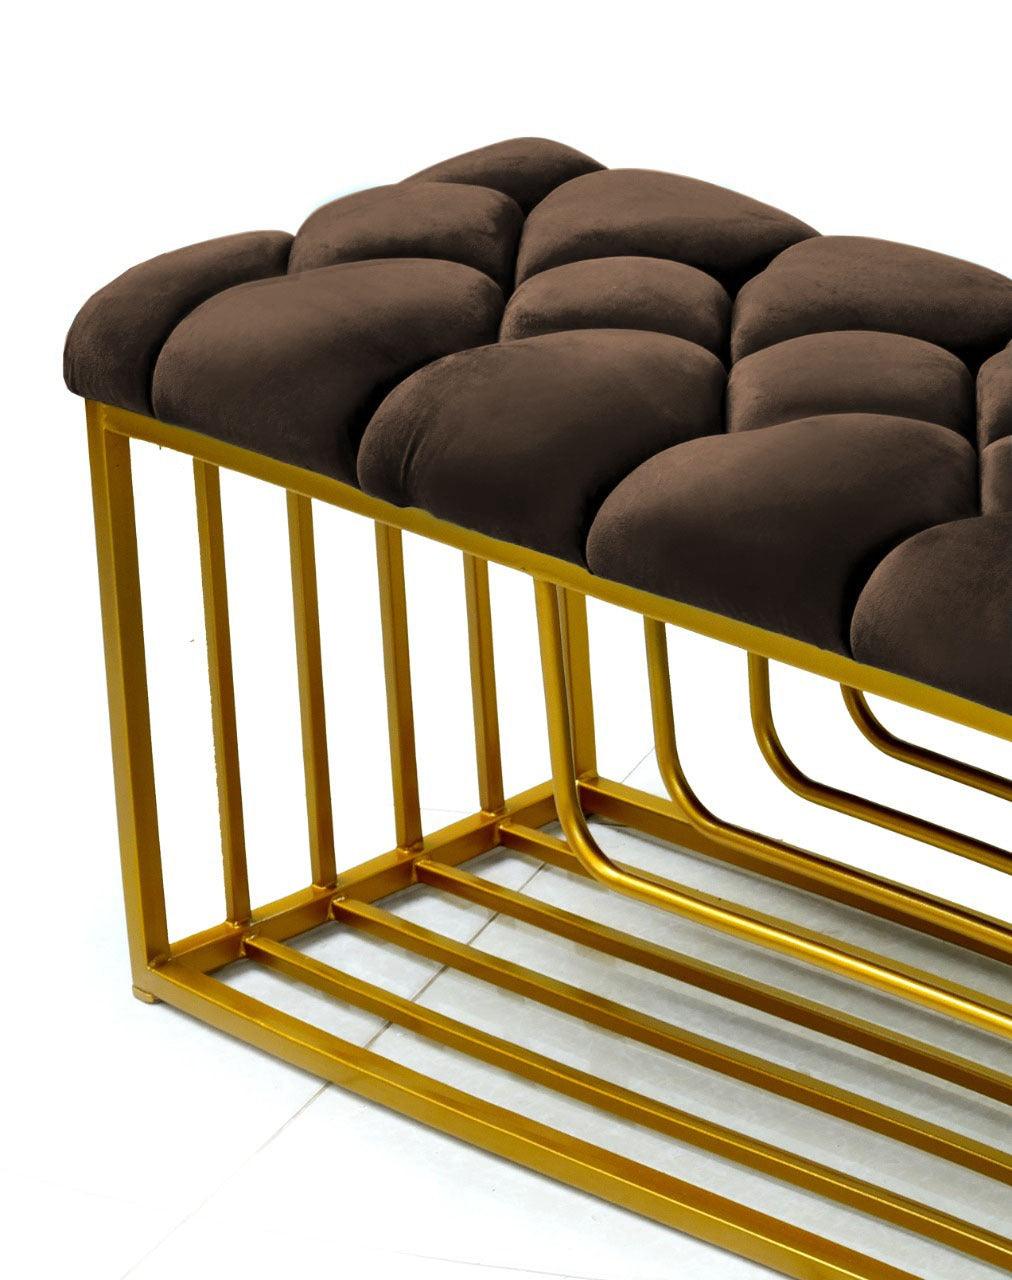 Luxury 3 Seater Stool With Shoe Rack -1043 - 92Bedding